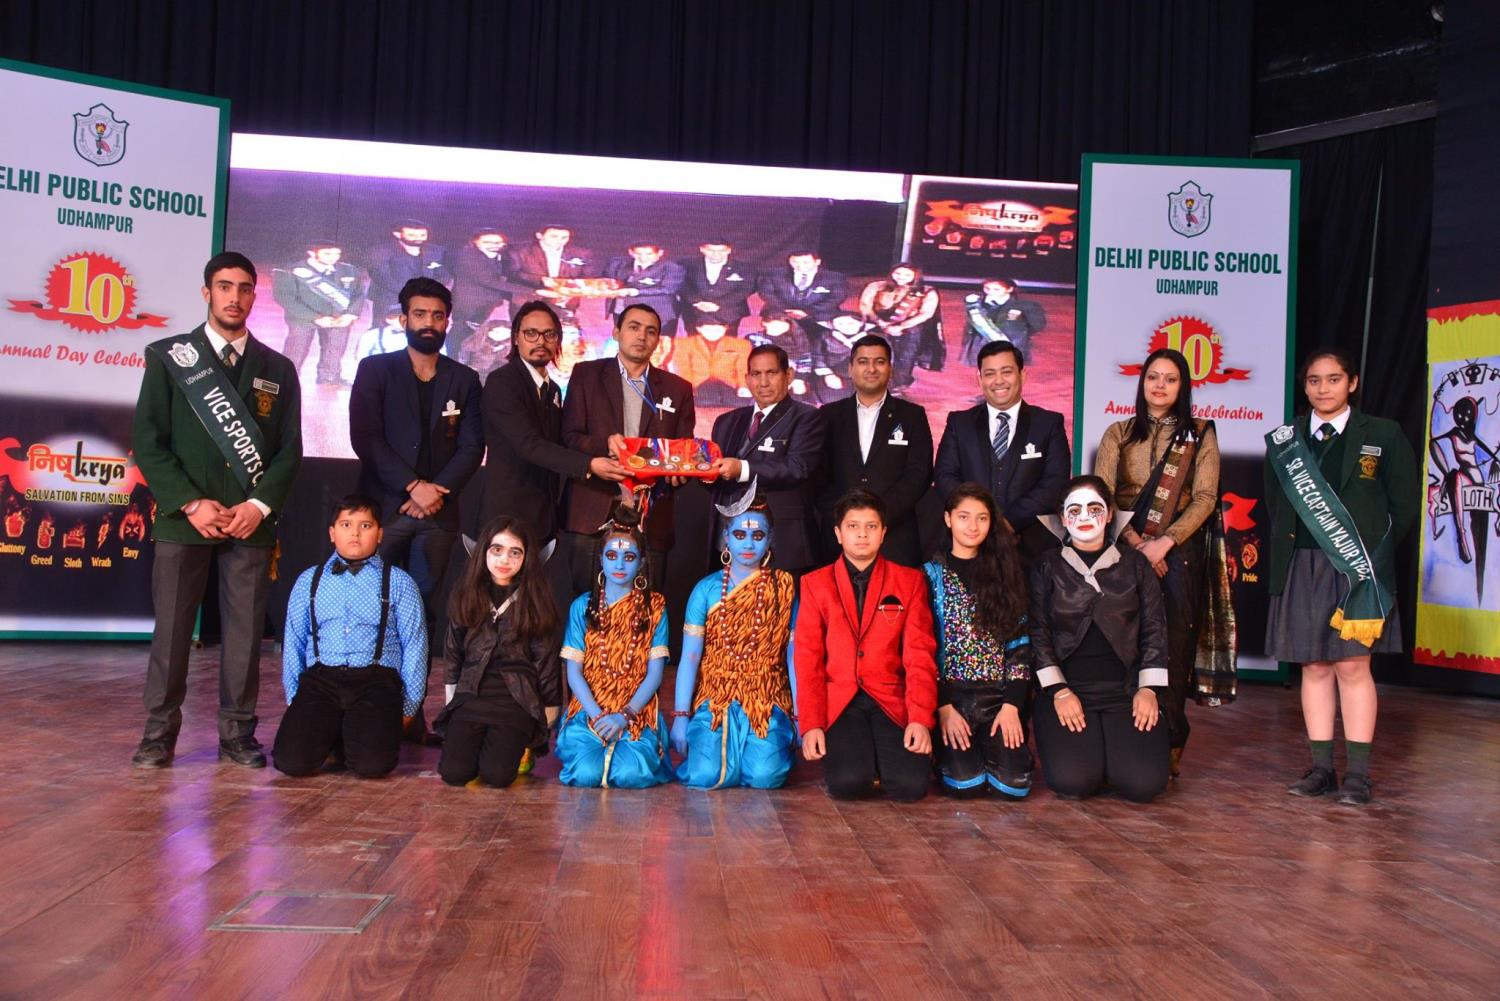 DPS UDHAMPUR CELEBRATED 10TH ANNUAL DAY